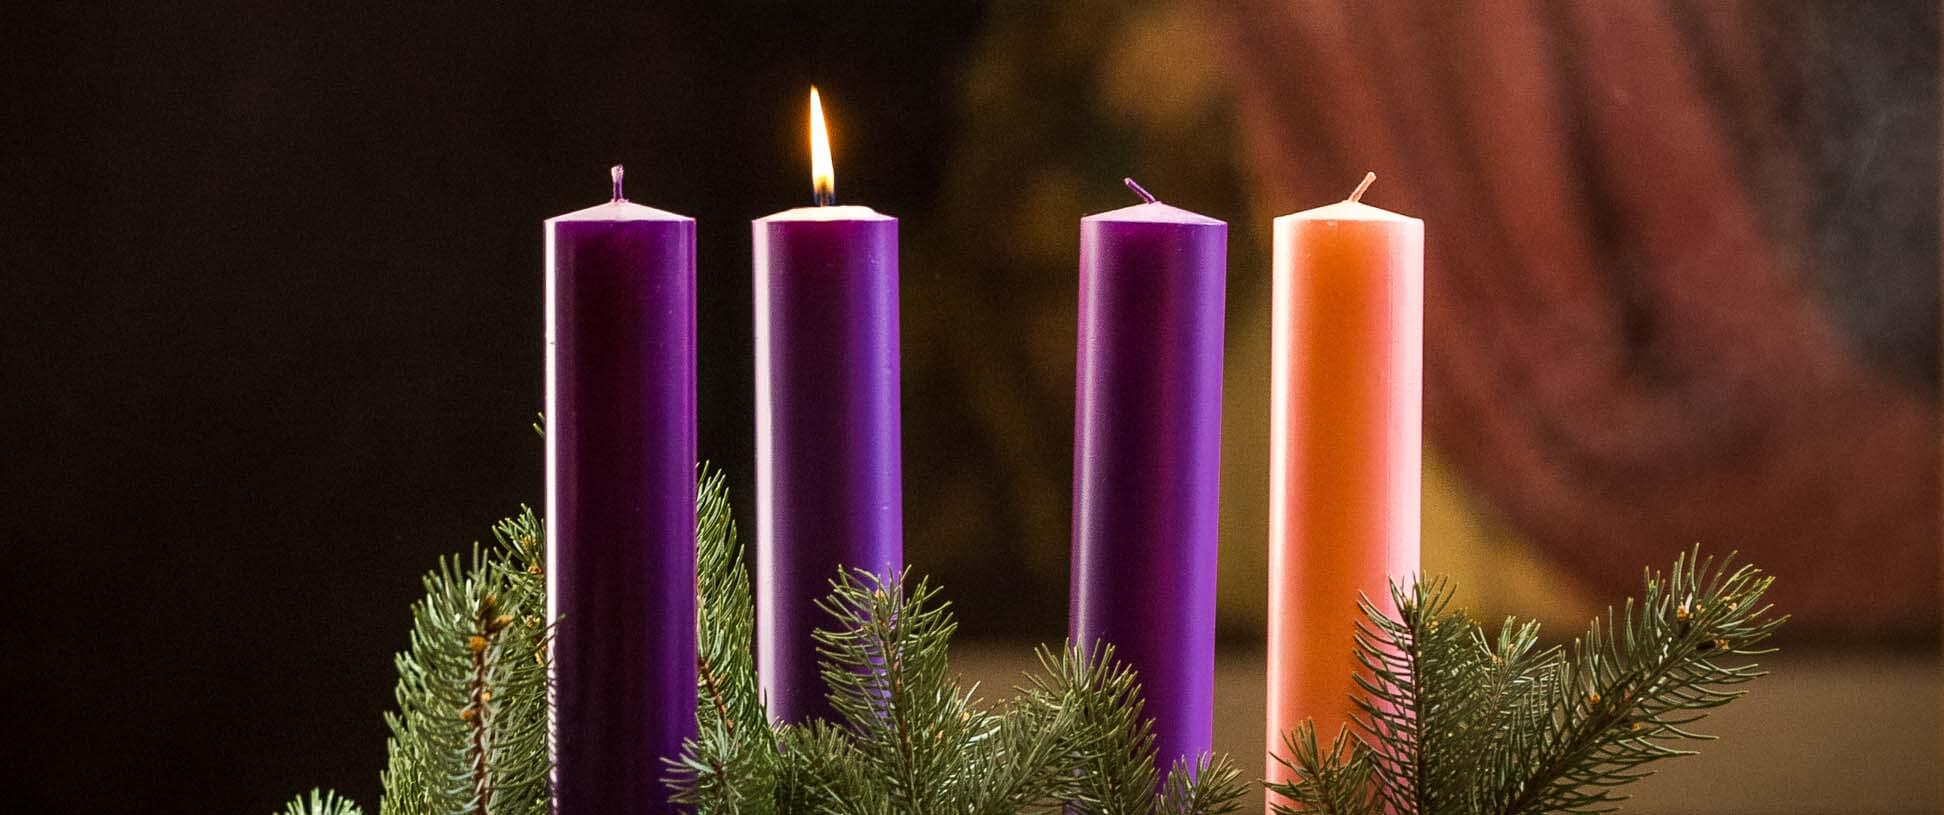 Advent begins with Mercy Archdiocese of Baltimore